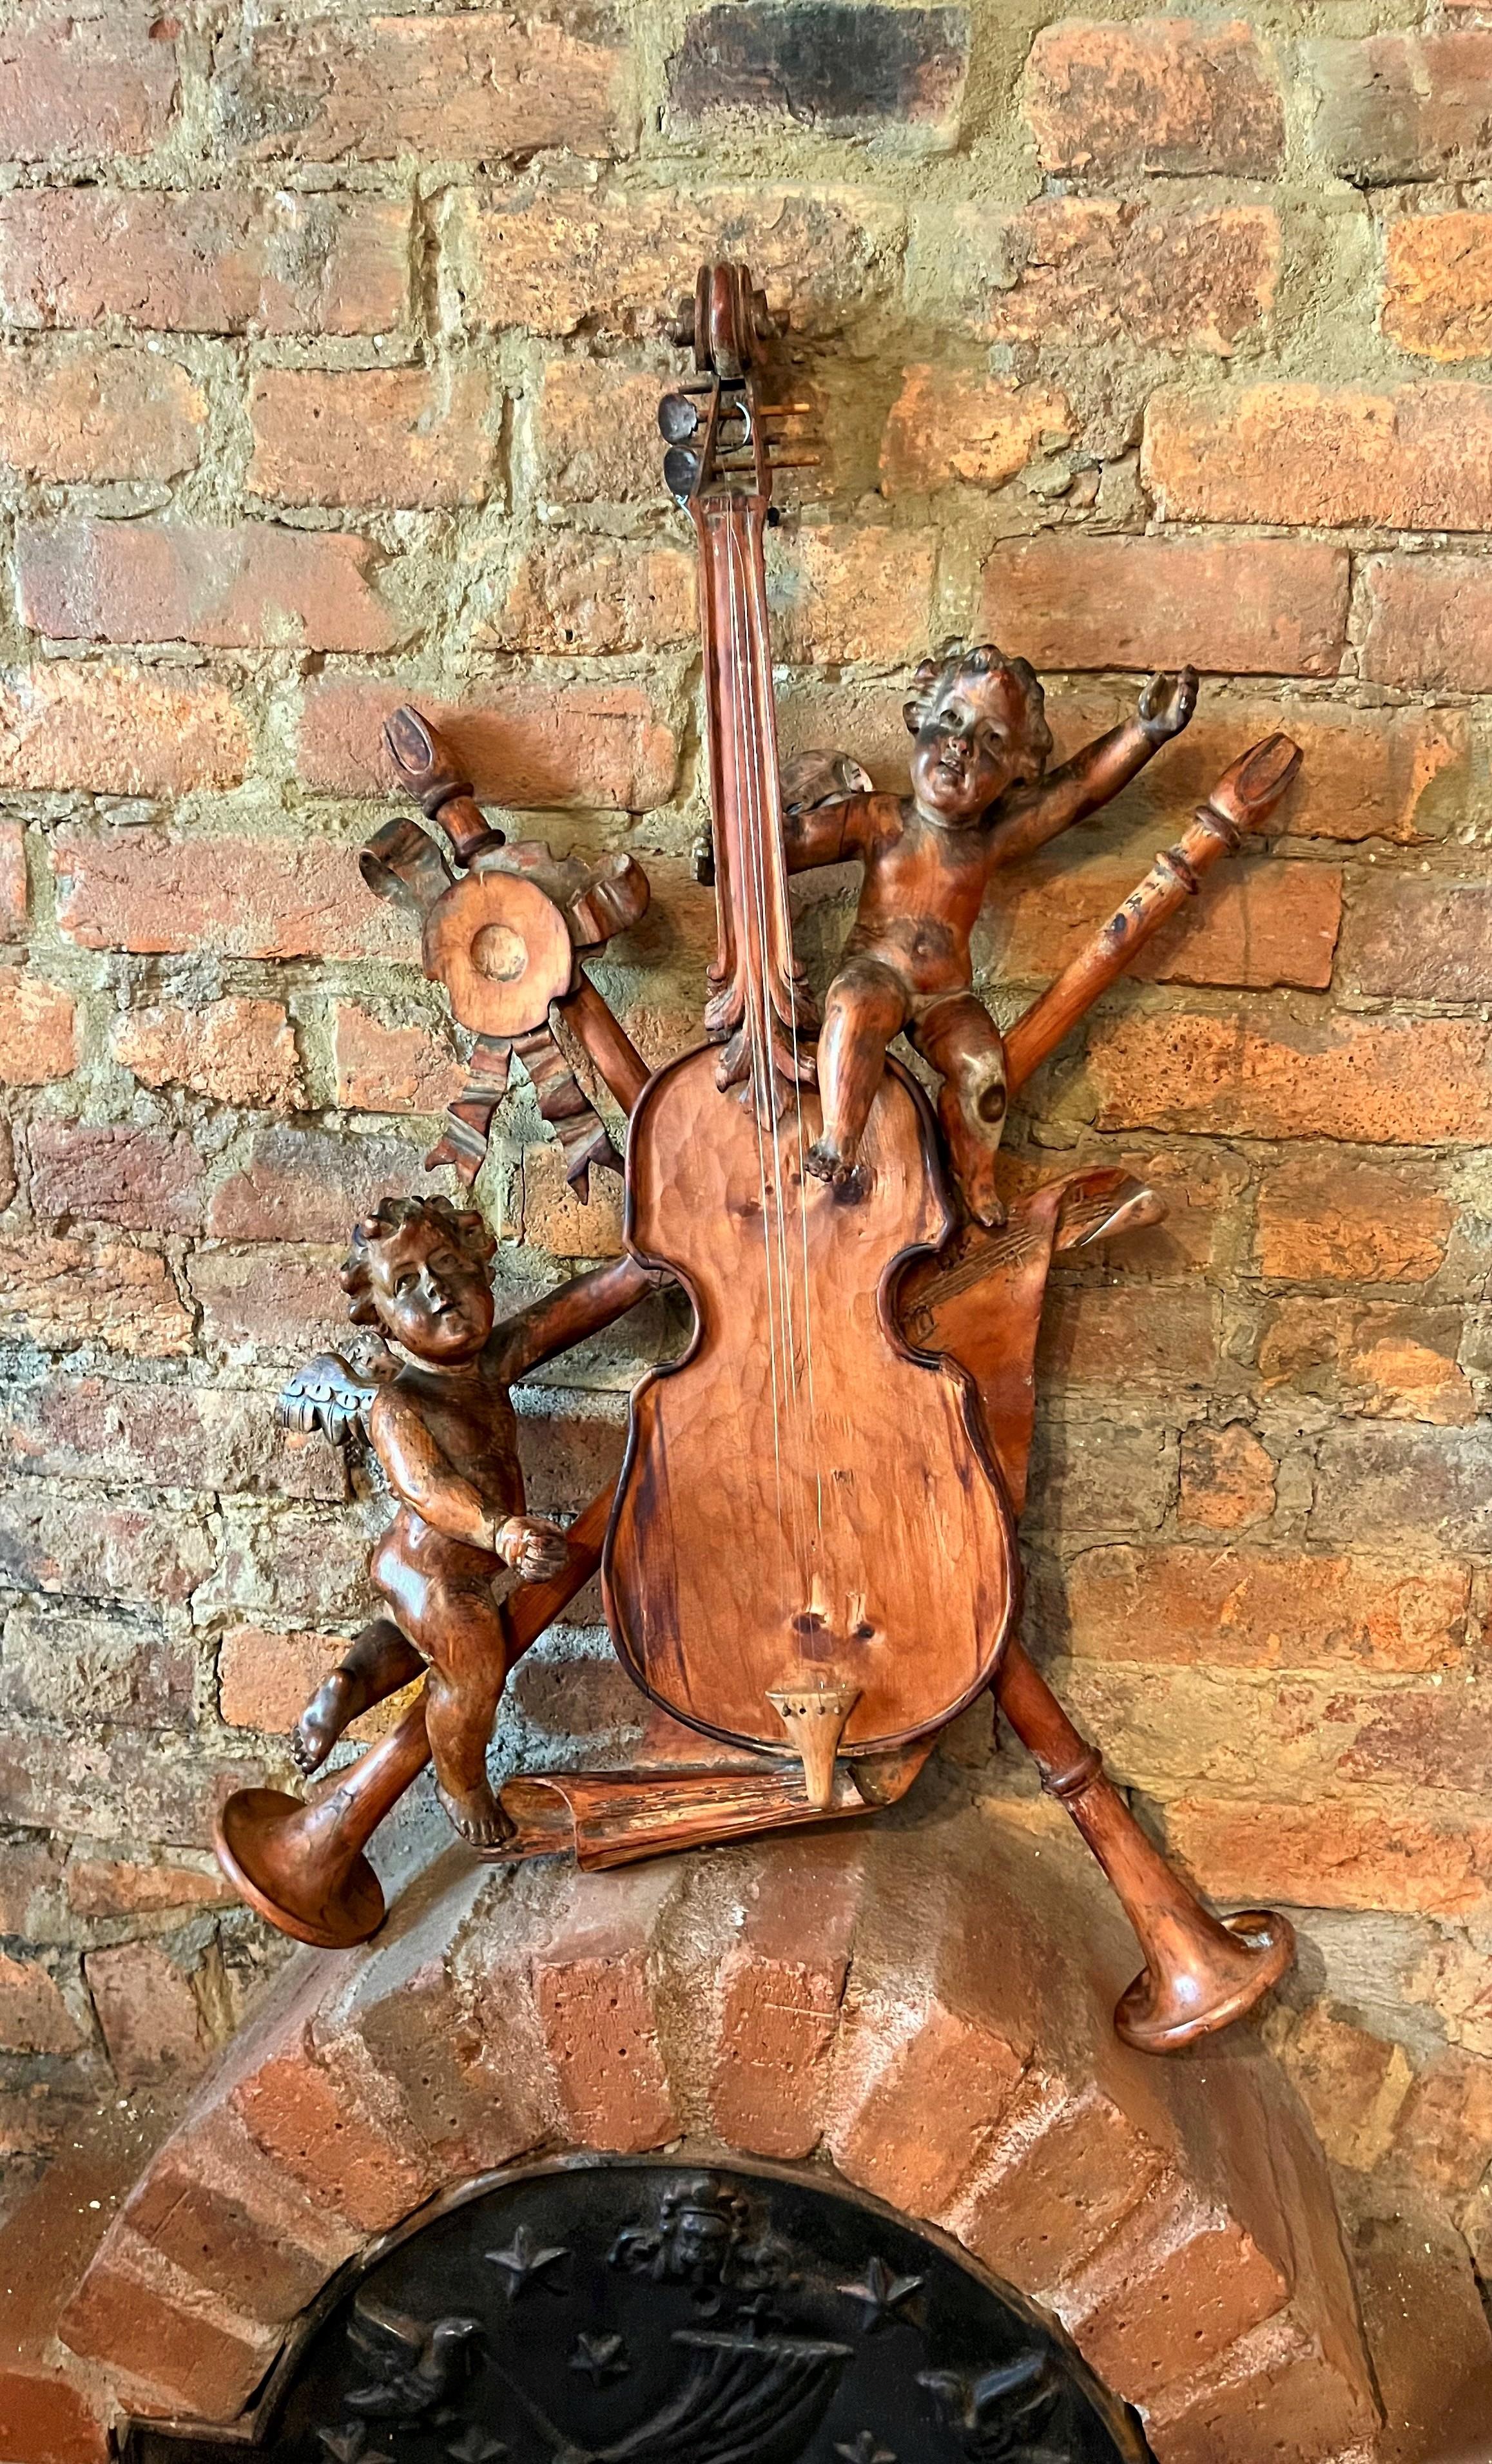 Possibly a Grand Tour Souvenir or remnant .A carved  wall trophy allegory to music., possibly part of boiserie and later configured to present. Two cherubs or putti in ascension among violin, ribbon, and trumpets. Mixed woods, pine and